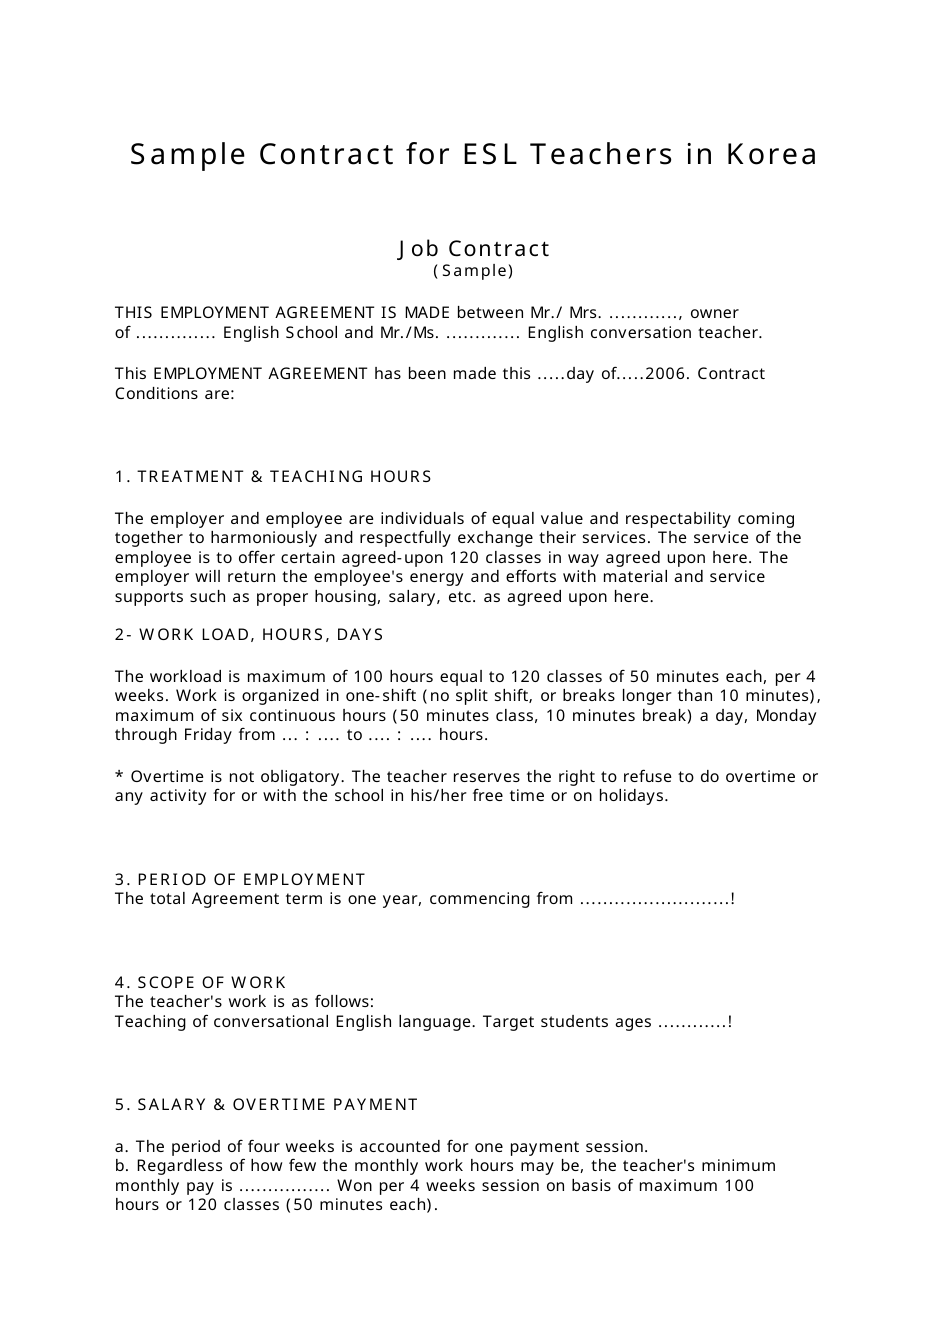 Contract for Esl Teachers in Korea, Page 1